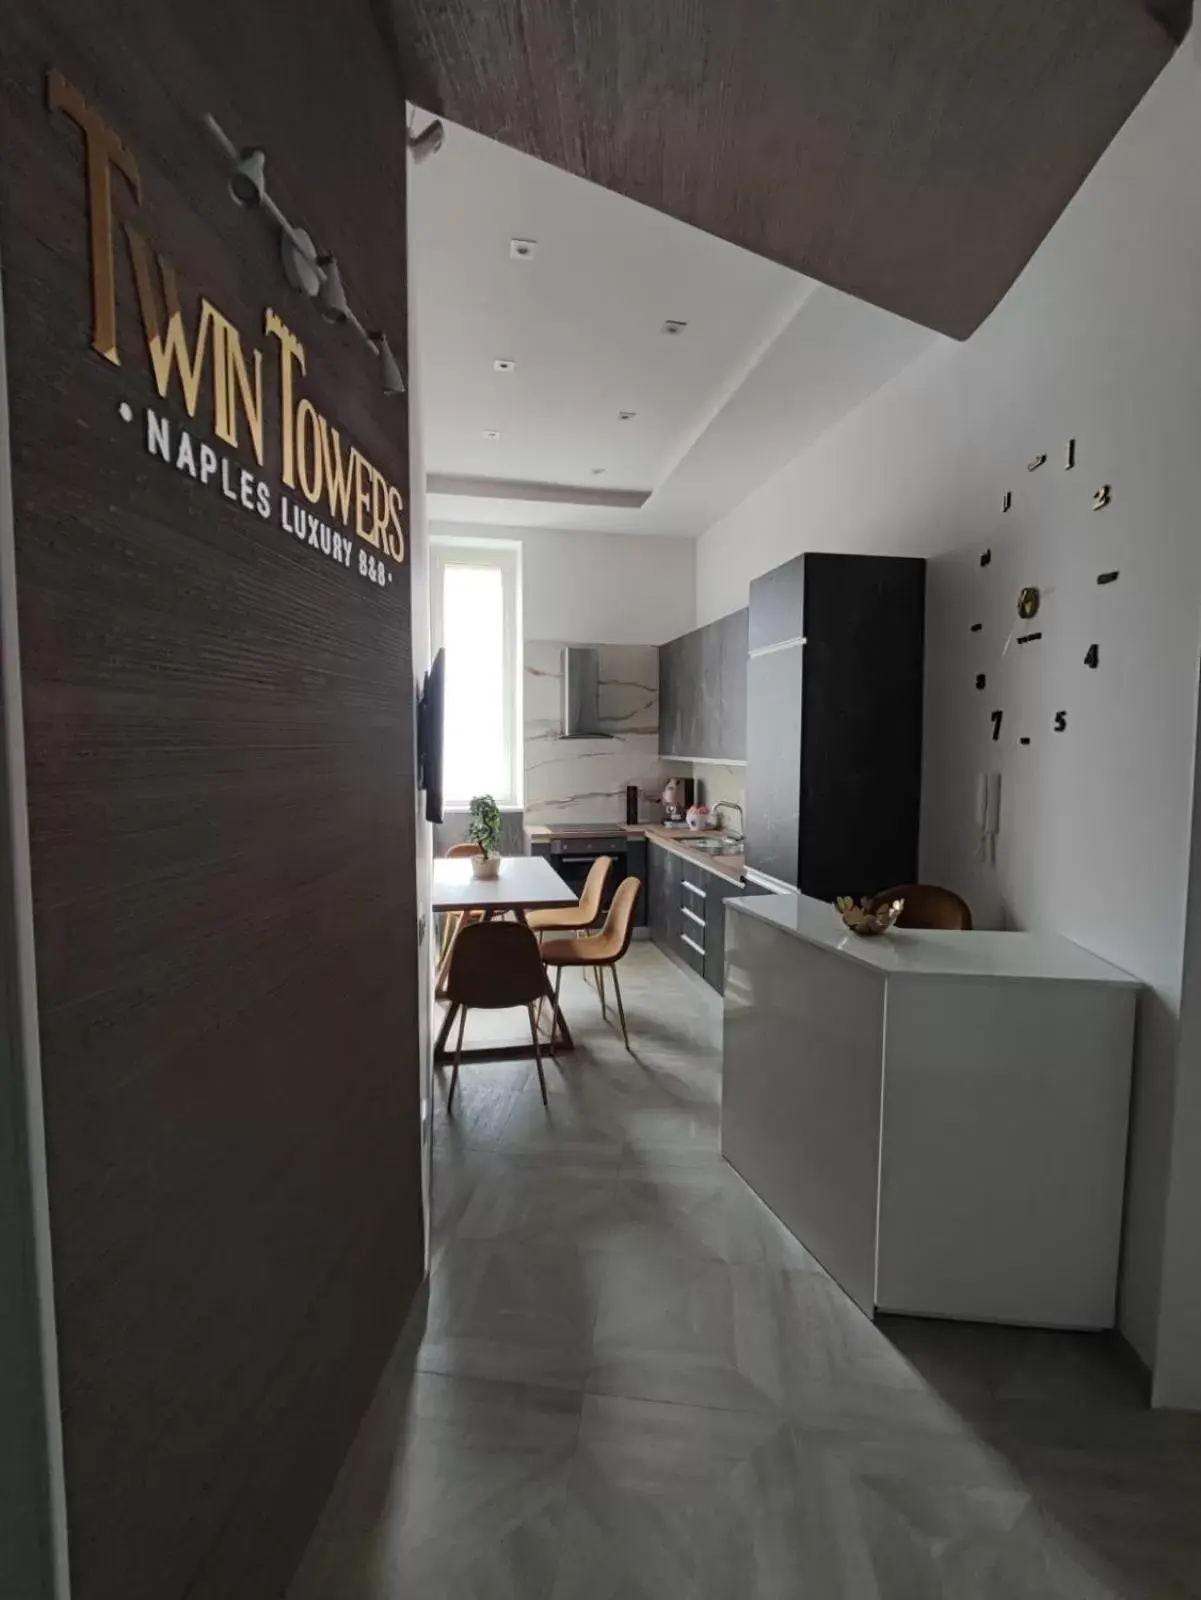 Communal kitchen in Twin Towers Naples Luxury